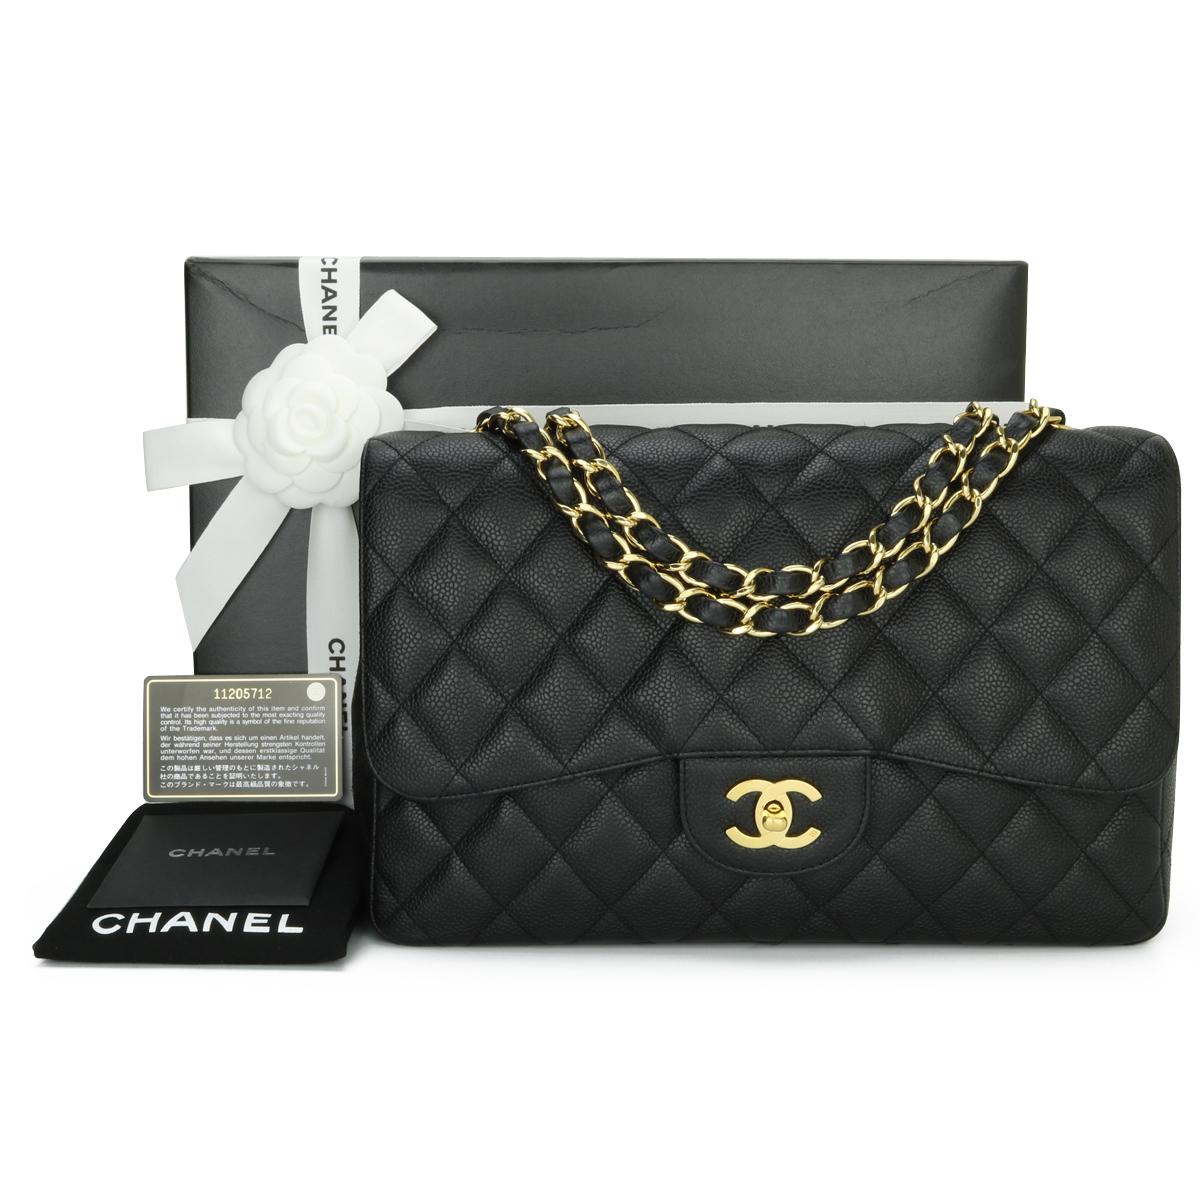 CHANEL Classic Single Flap Jumbo Bag Black Caviar with 24k Gold Plated Hardware 2007.

This stunning bag is in excellent condition, the bag still holds its original shape, and the hardware is still very shiny. 

- Exterior Condition: Excellent